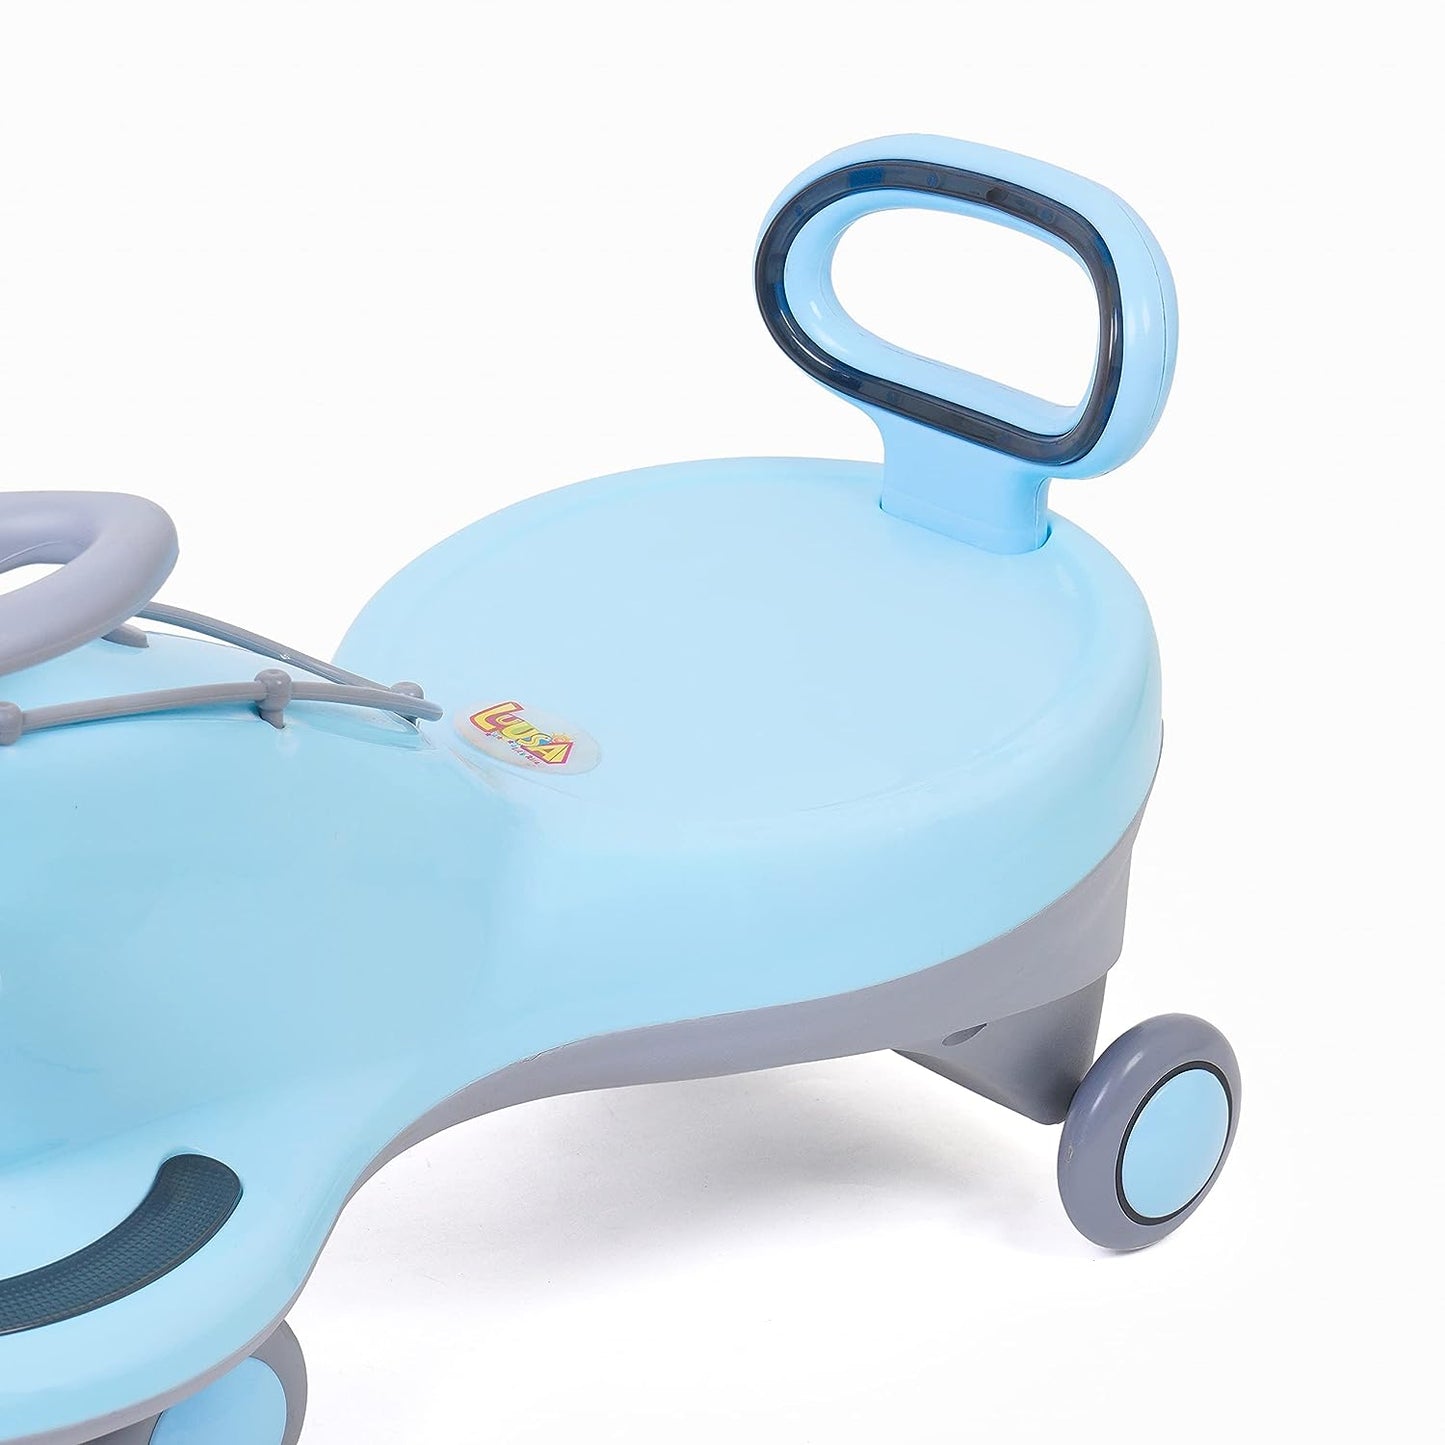 Luusa Train Cooper Magic Car: The Ultimate Ride-On Toy for Kids Aged 2-8 Years with Music and Lights